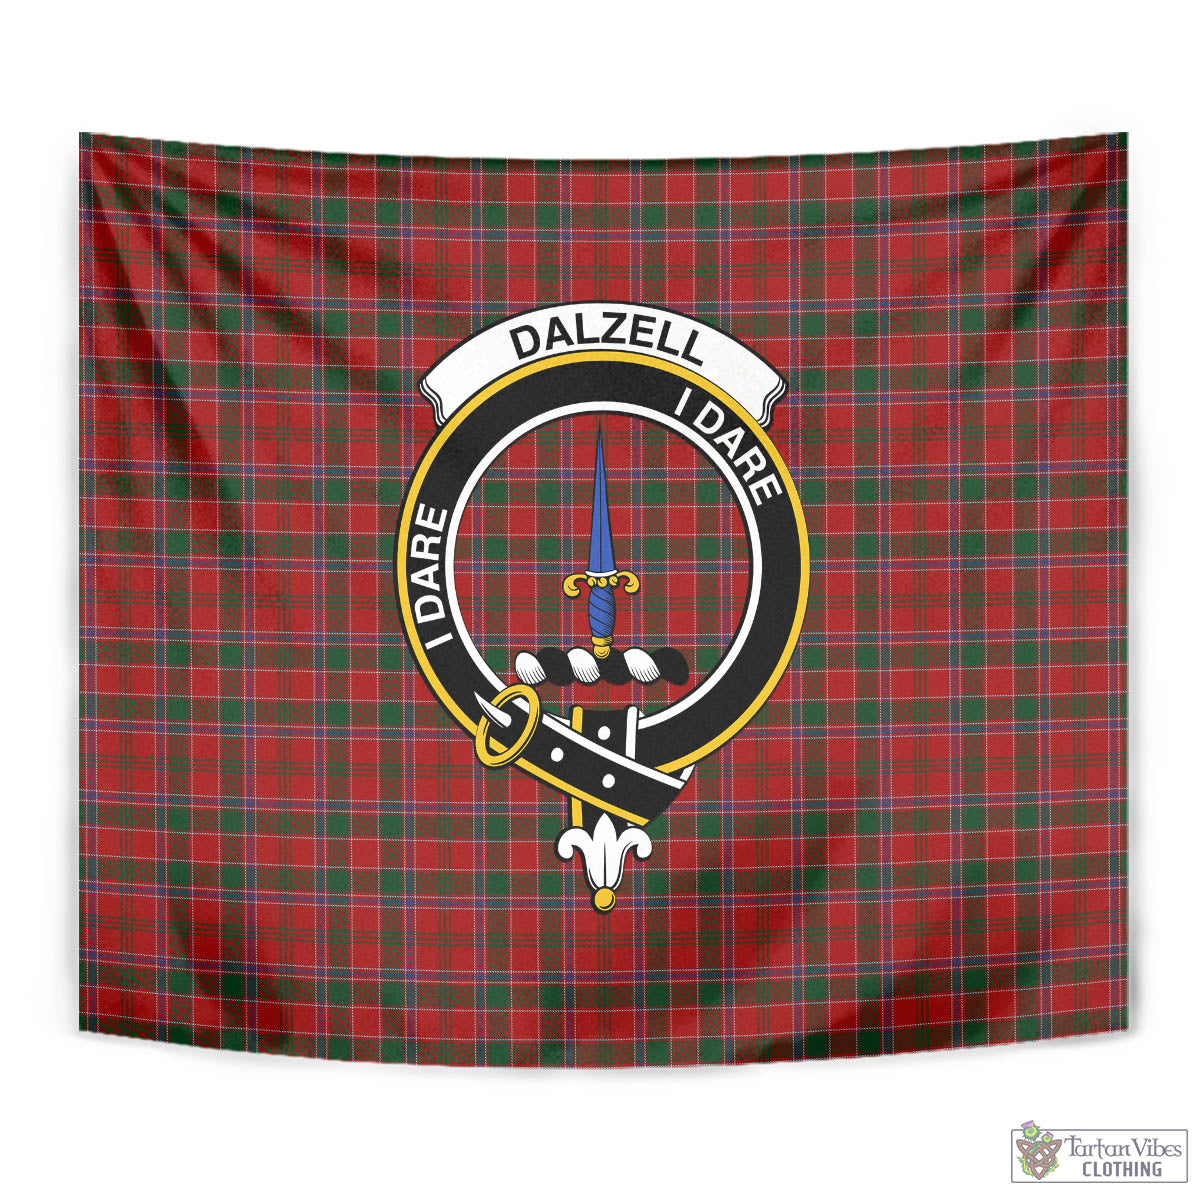 Tartan Vibes Clothing Dalzell (Dalziel) Tartan Tapestry Wall Hanging and Home Decor for Room with Family Crest